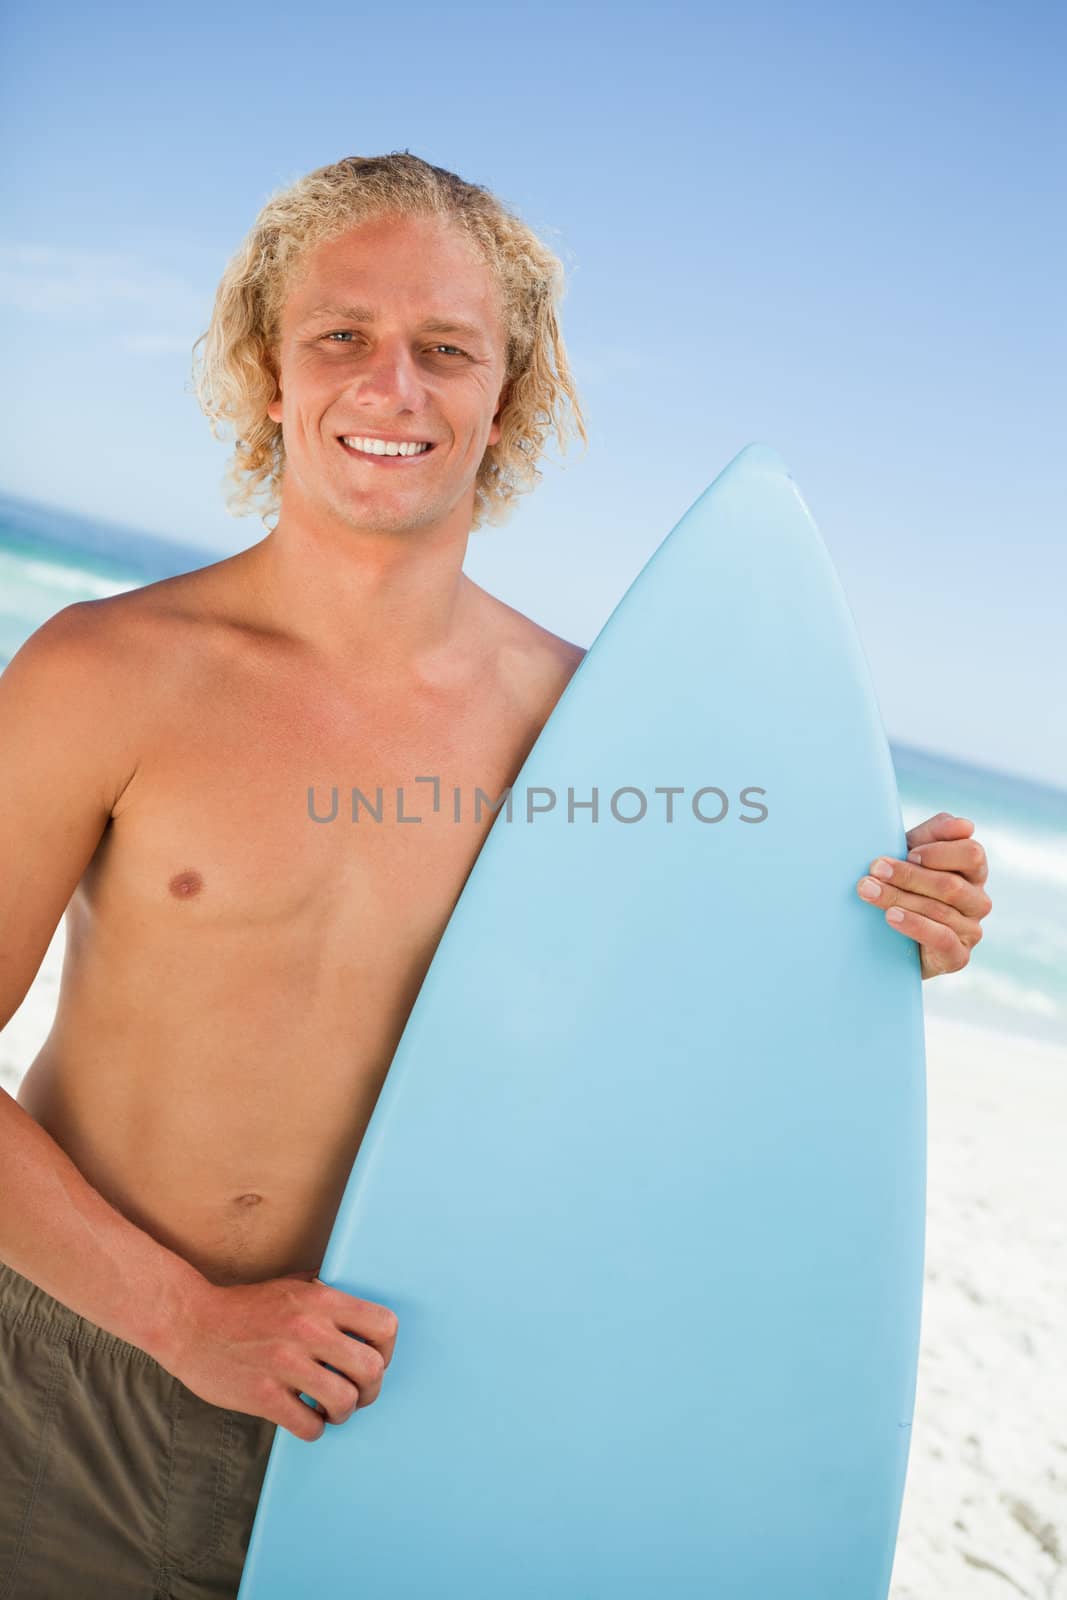 Young smiling man standing upright on the beach while holding his surfboard